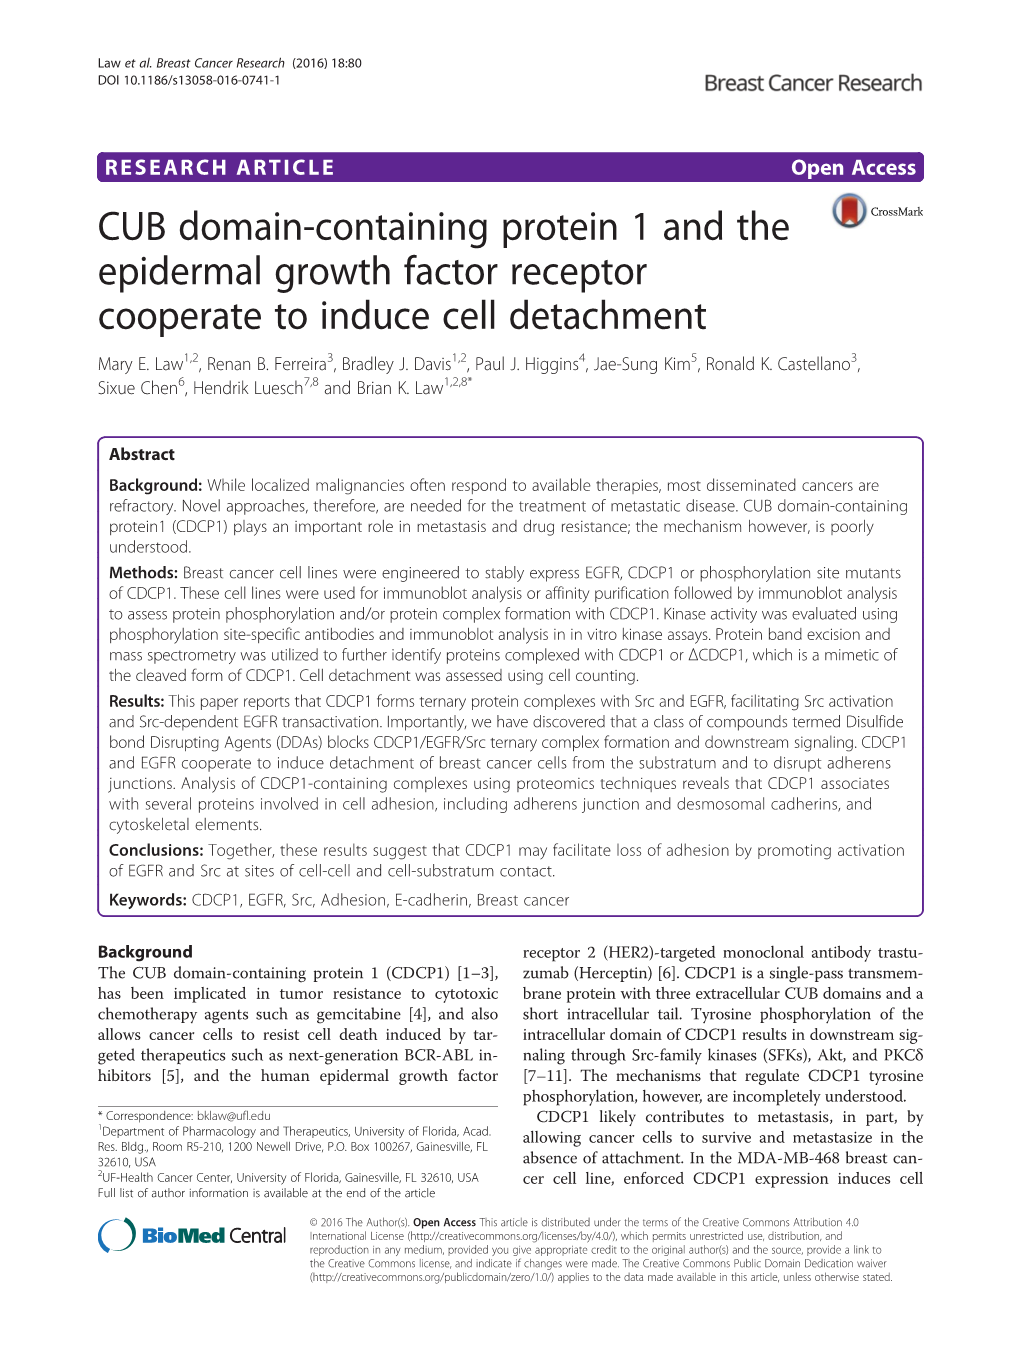 CUB Domain-Containing Protein 1 and the Epidermal Growth Factor Receptor Cooperate to Induce Cell Detachment Mary E